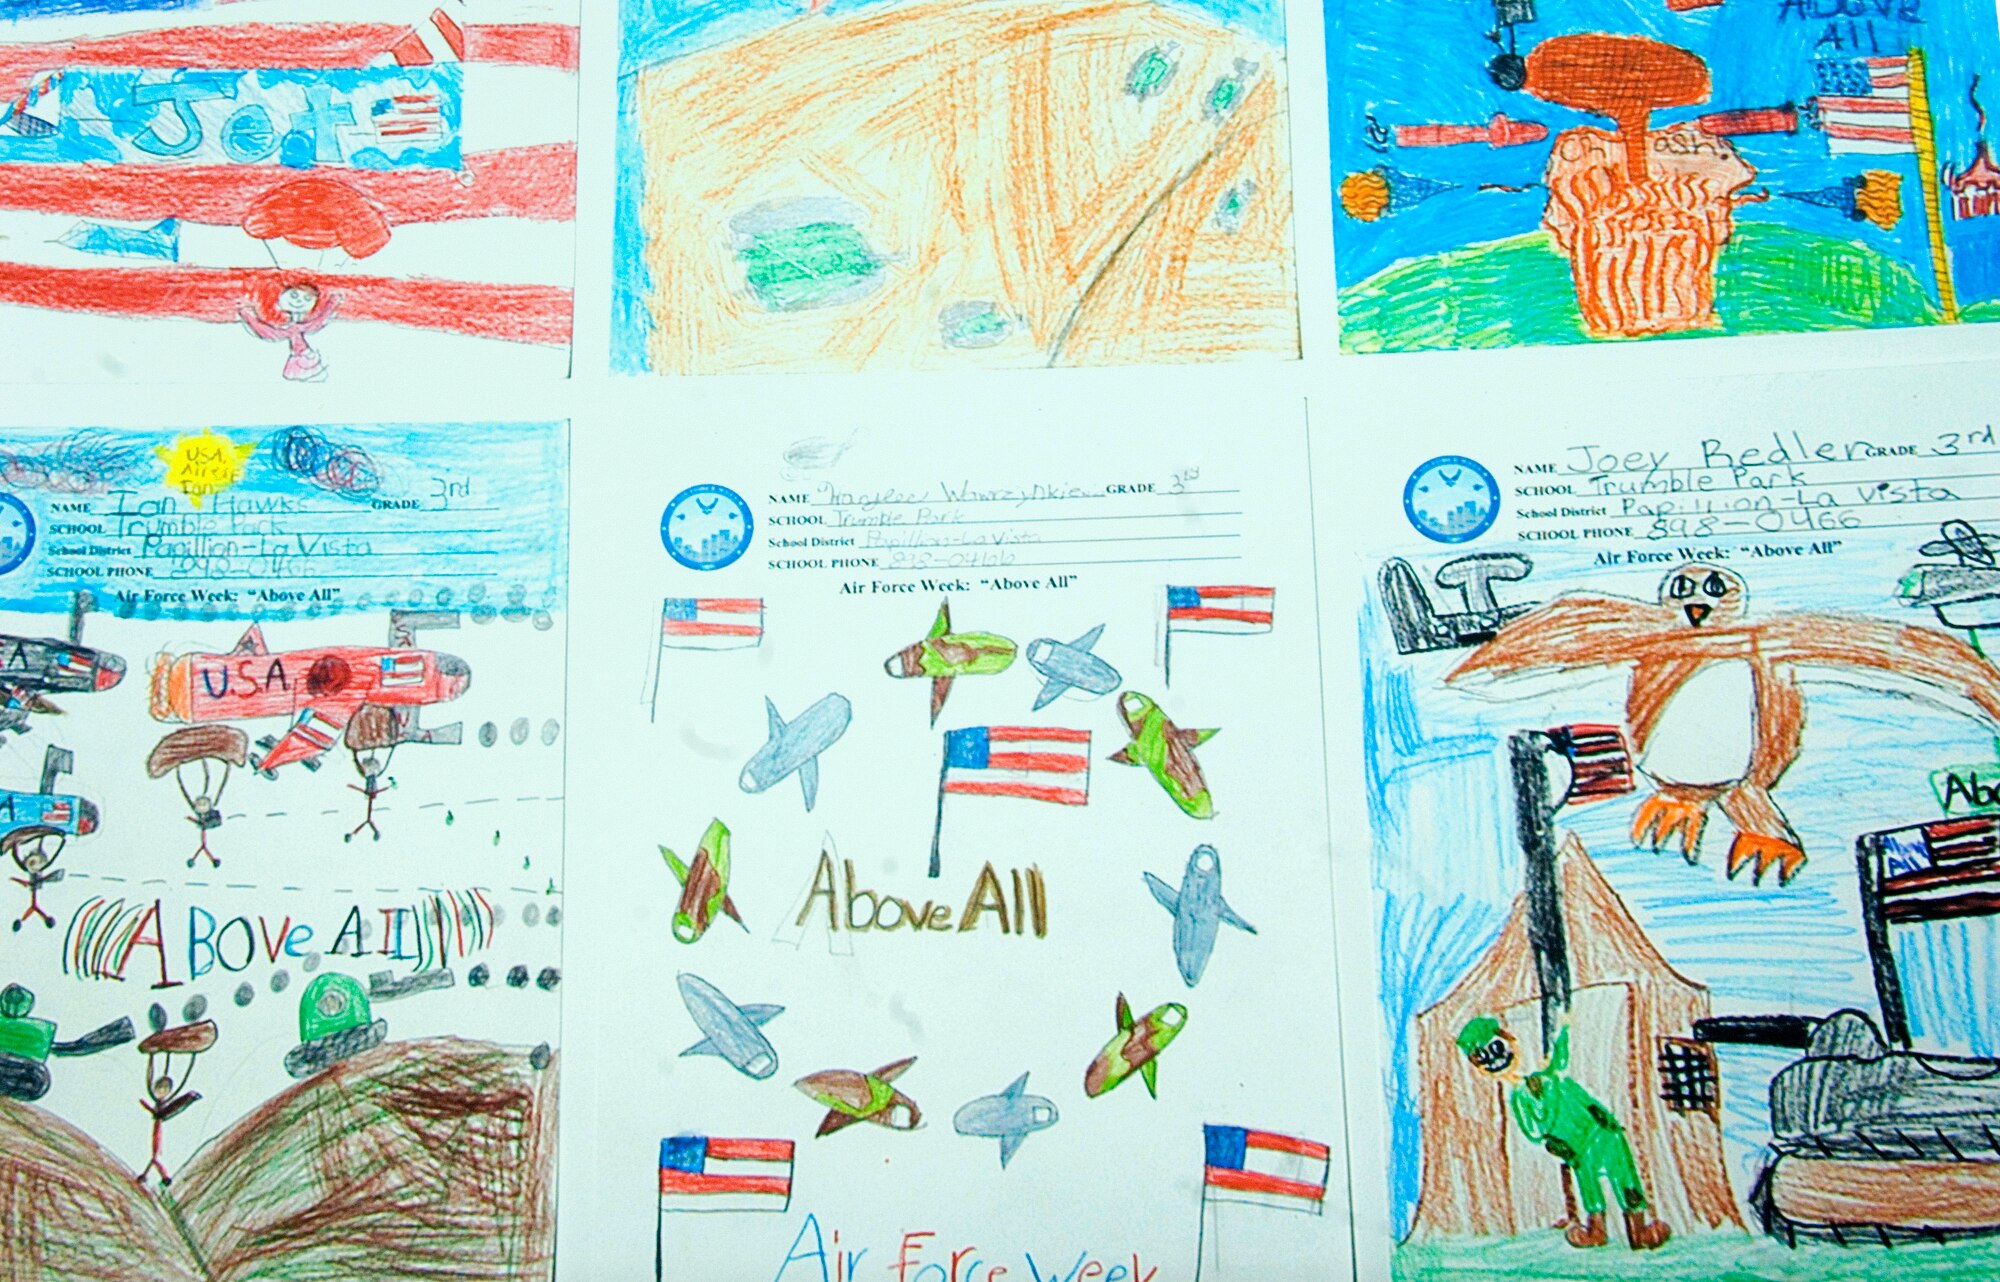 Elementary students from the local community display their submissions for a special Air Force Week design contest exhibited at Air Force Week in the Heartland Aug. 13 at the Strategic Air and Space Museum in Ashland, Neb. Museum officials hosted a day dedicated to the legacy of airpower providing special Air Force demonstration teams and displays. (U.S. Air Force photo/Staff Sgt. Bennie J. Davis III)